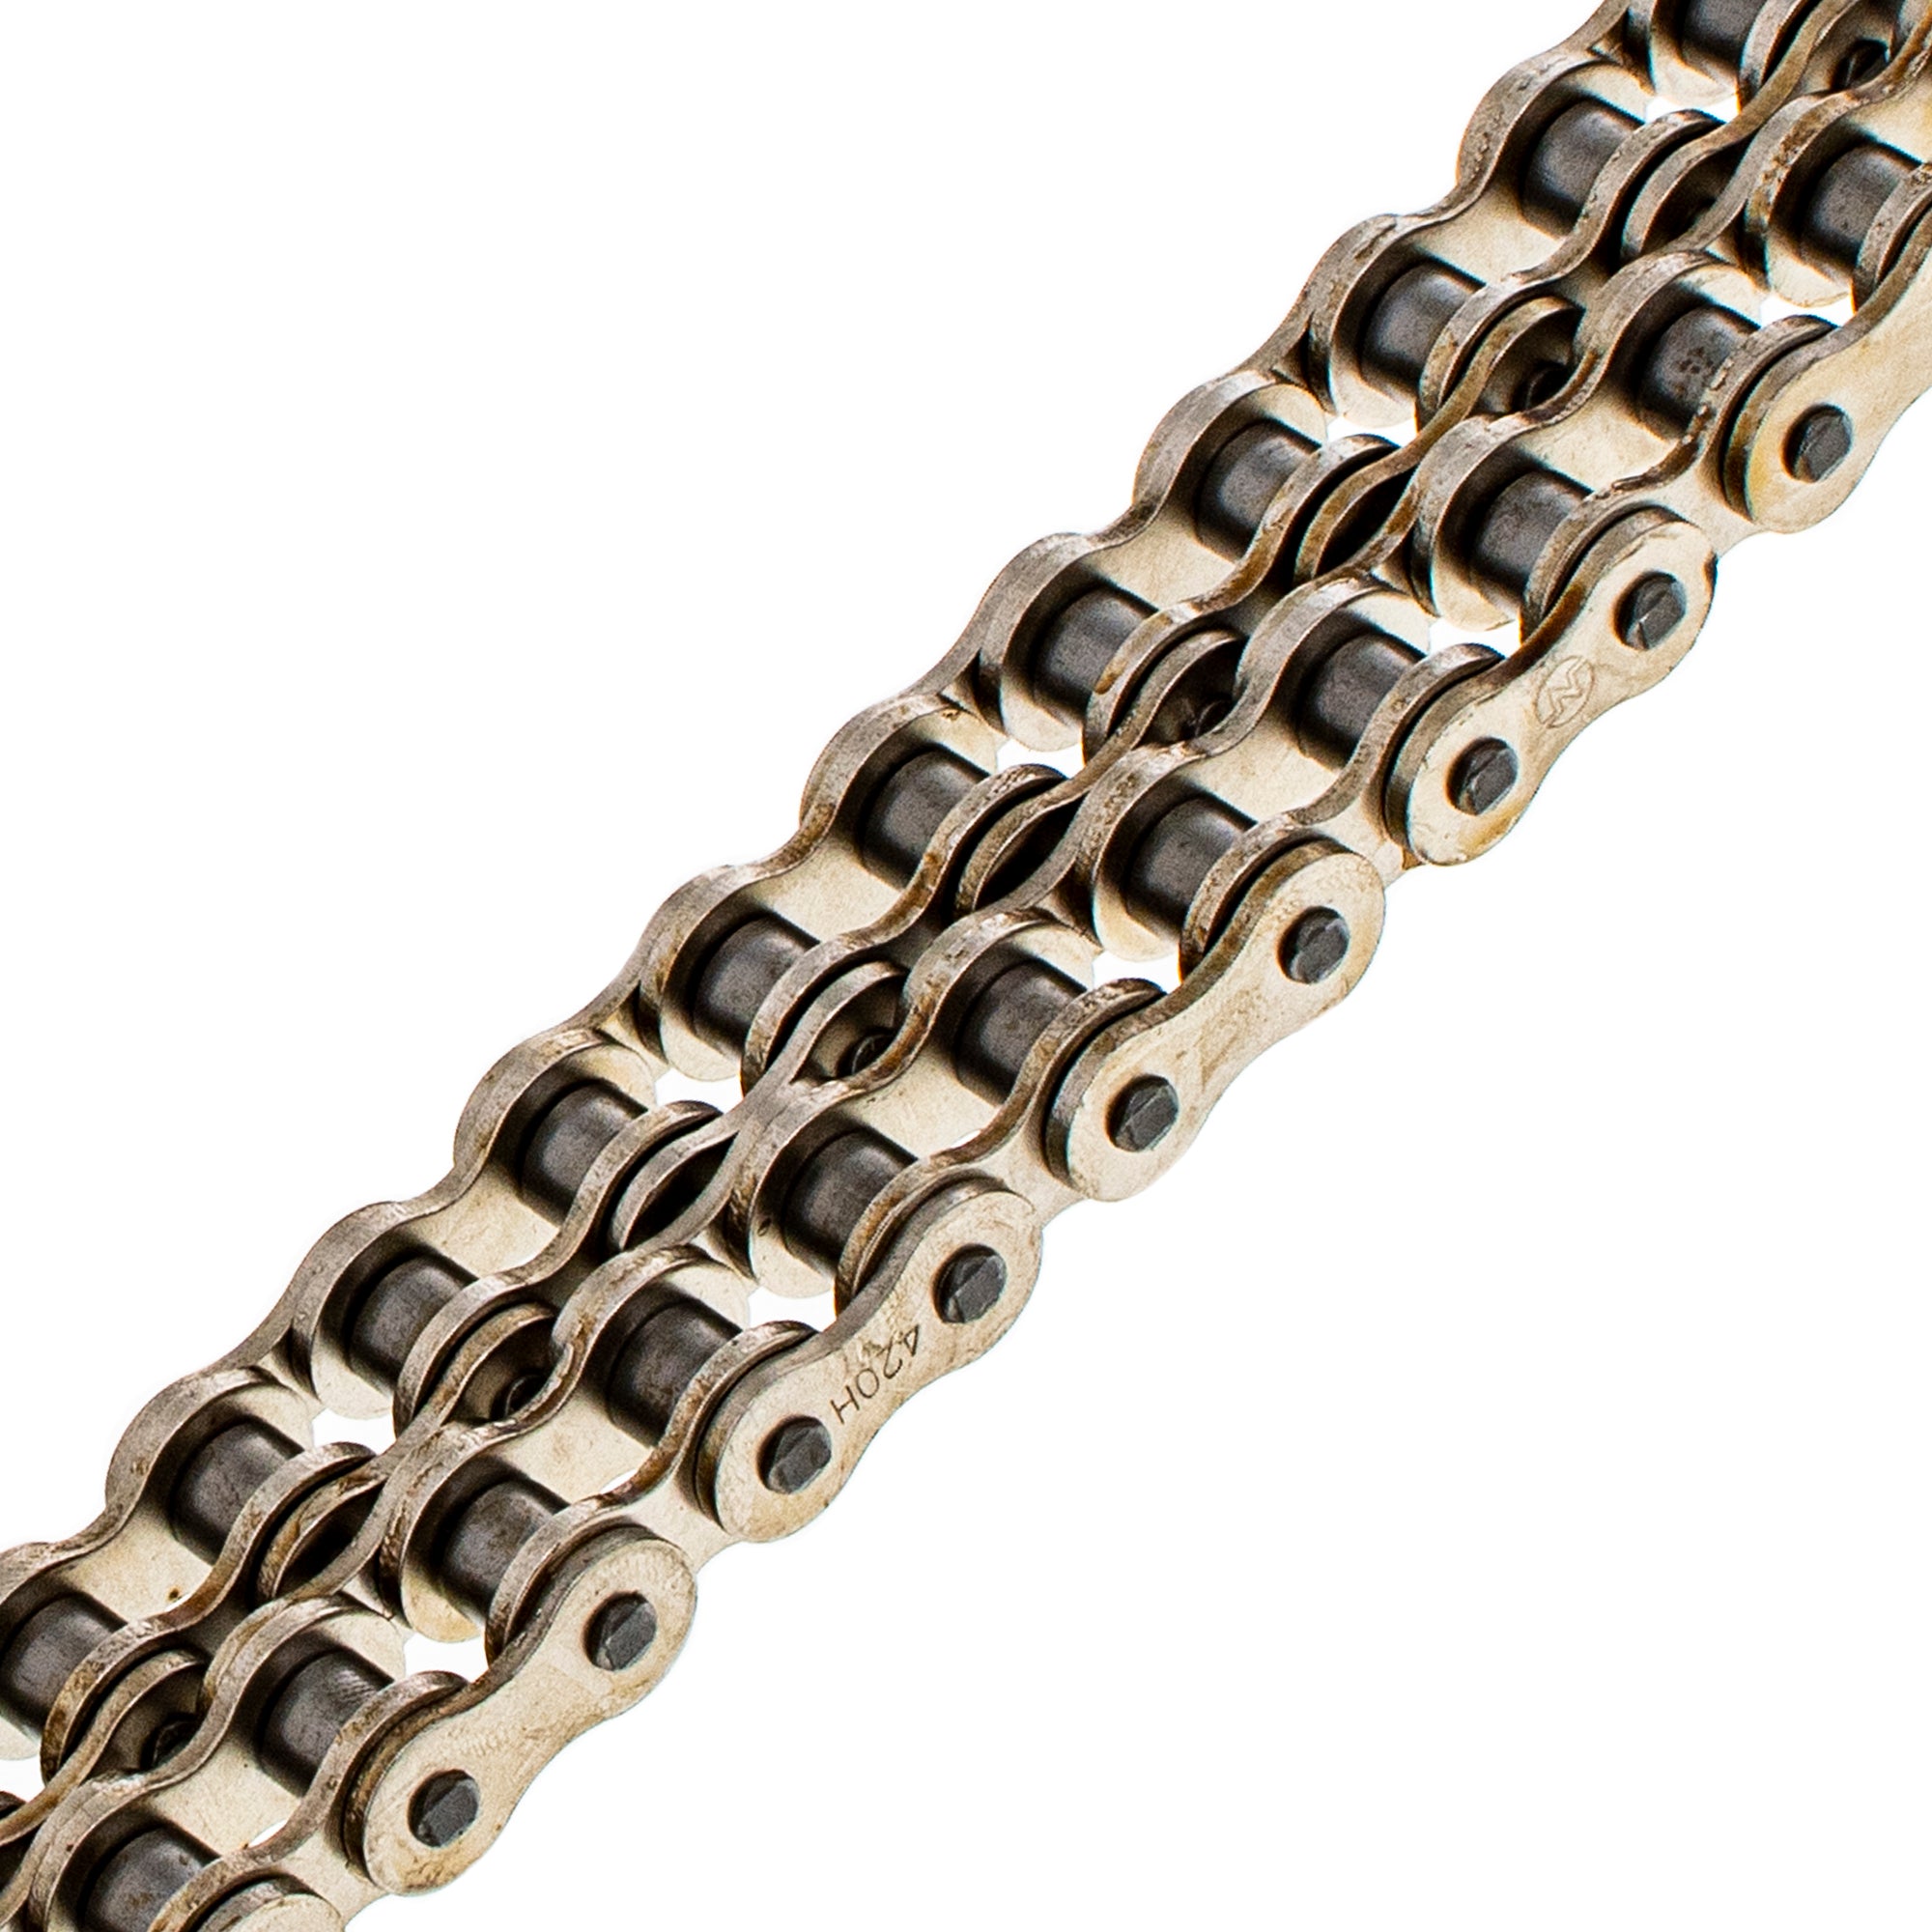 Drive Chain 92 Standard Non O-Ring w/ Master Link for zOTHER XL80S XL75 XL70 Trail NICHE 519-CDC2325H